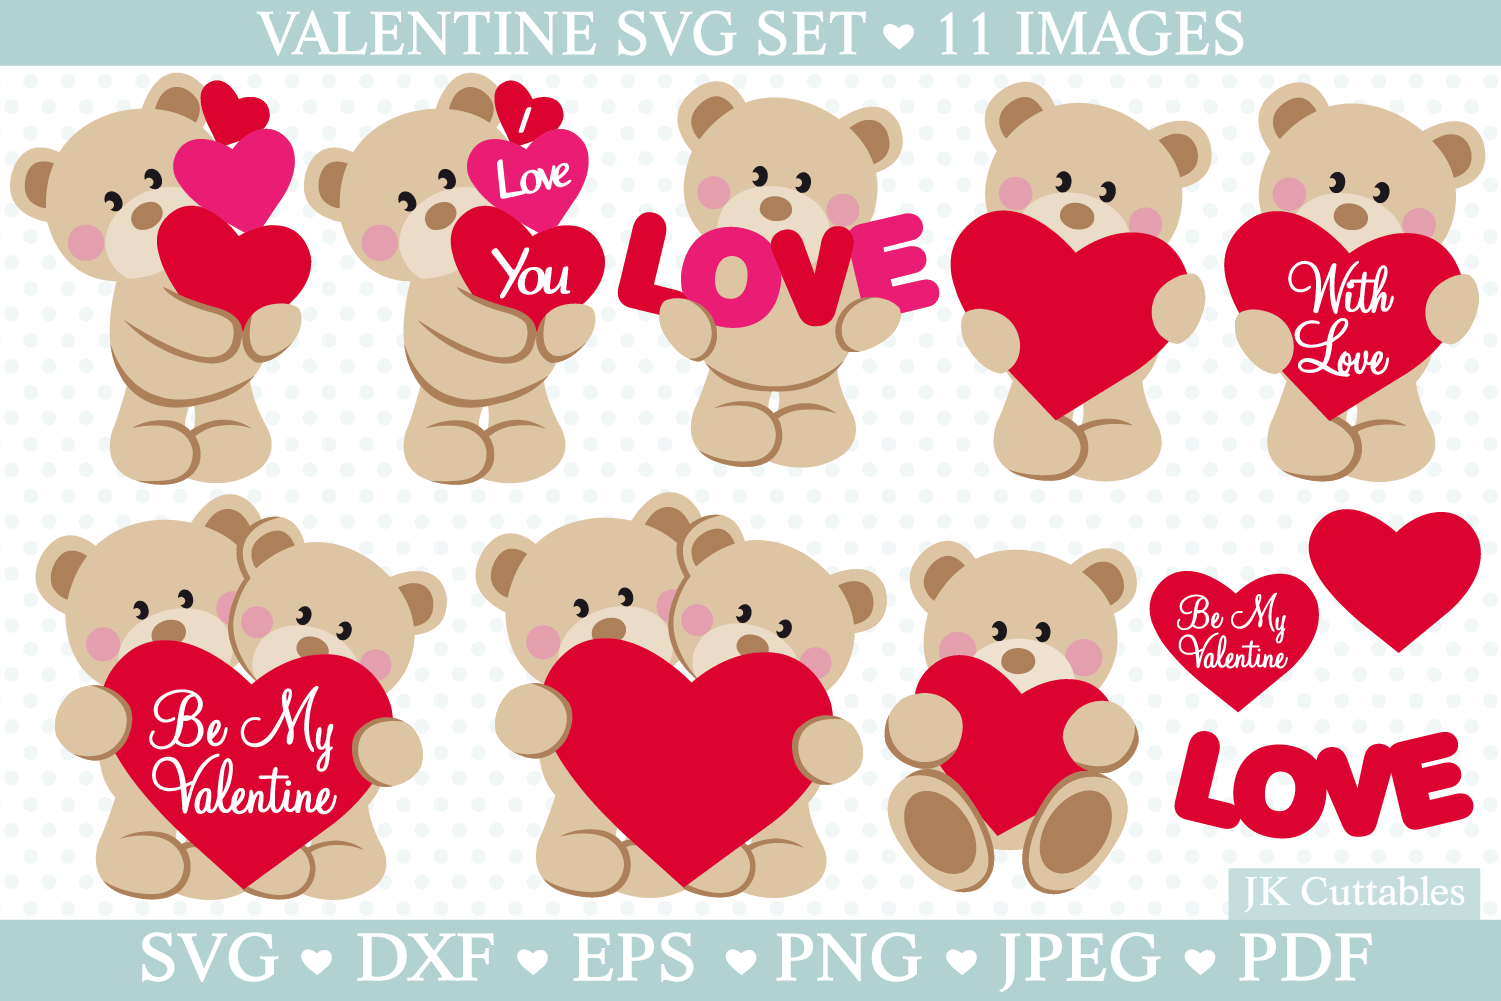 Valentine SVG cut files for crafters